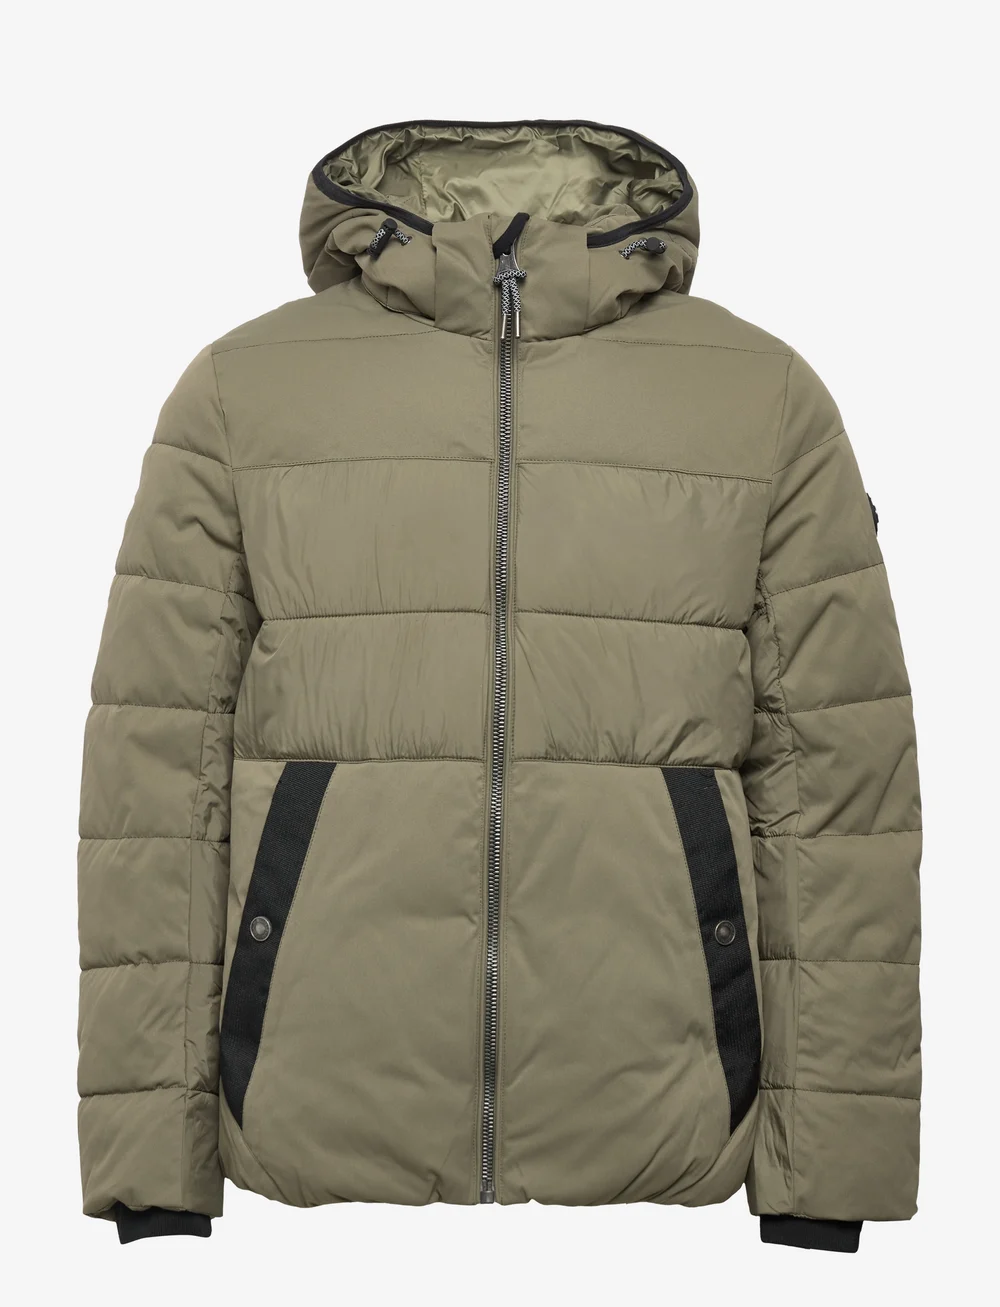 Tom Tailor Mat Mix Puffer Jacket - 129.99 €. Buy Padded jackets from Tom  Tailor online at Boozt.com. Fast delivery and easy returns